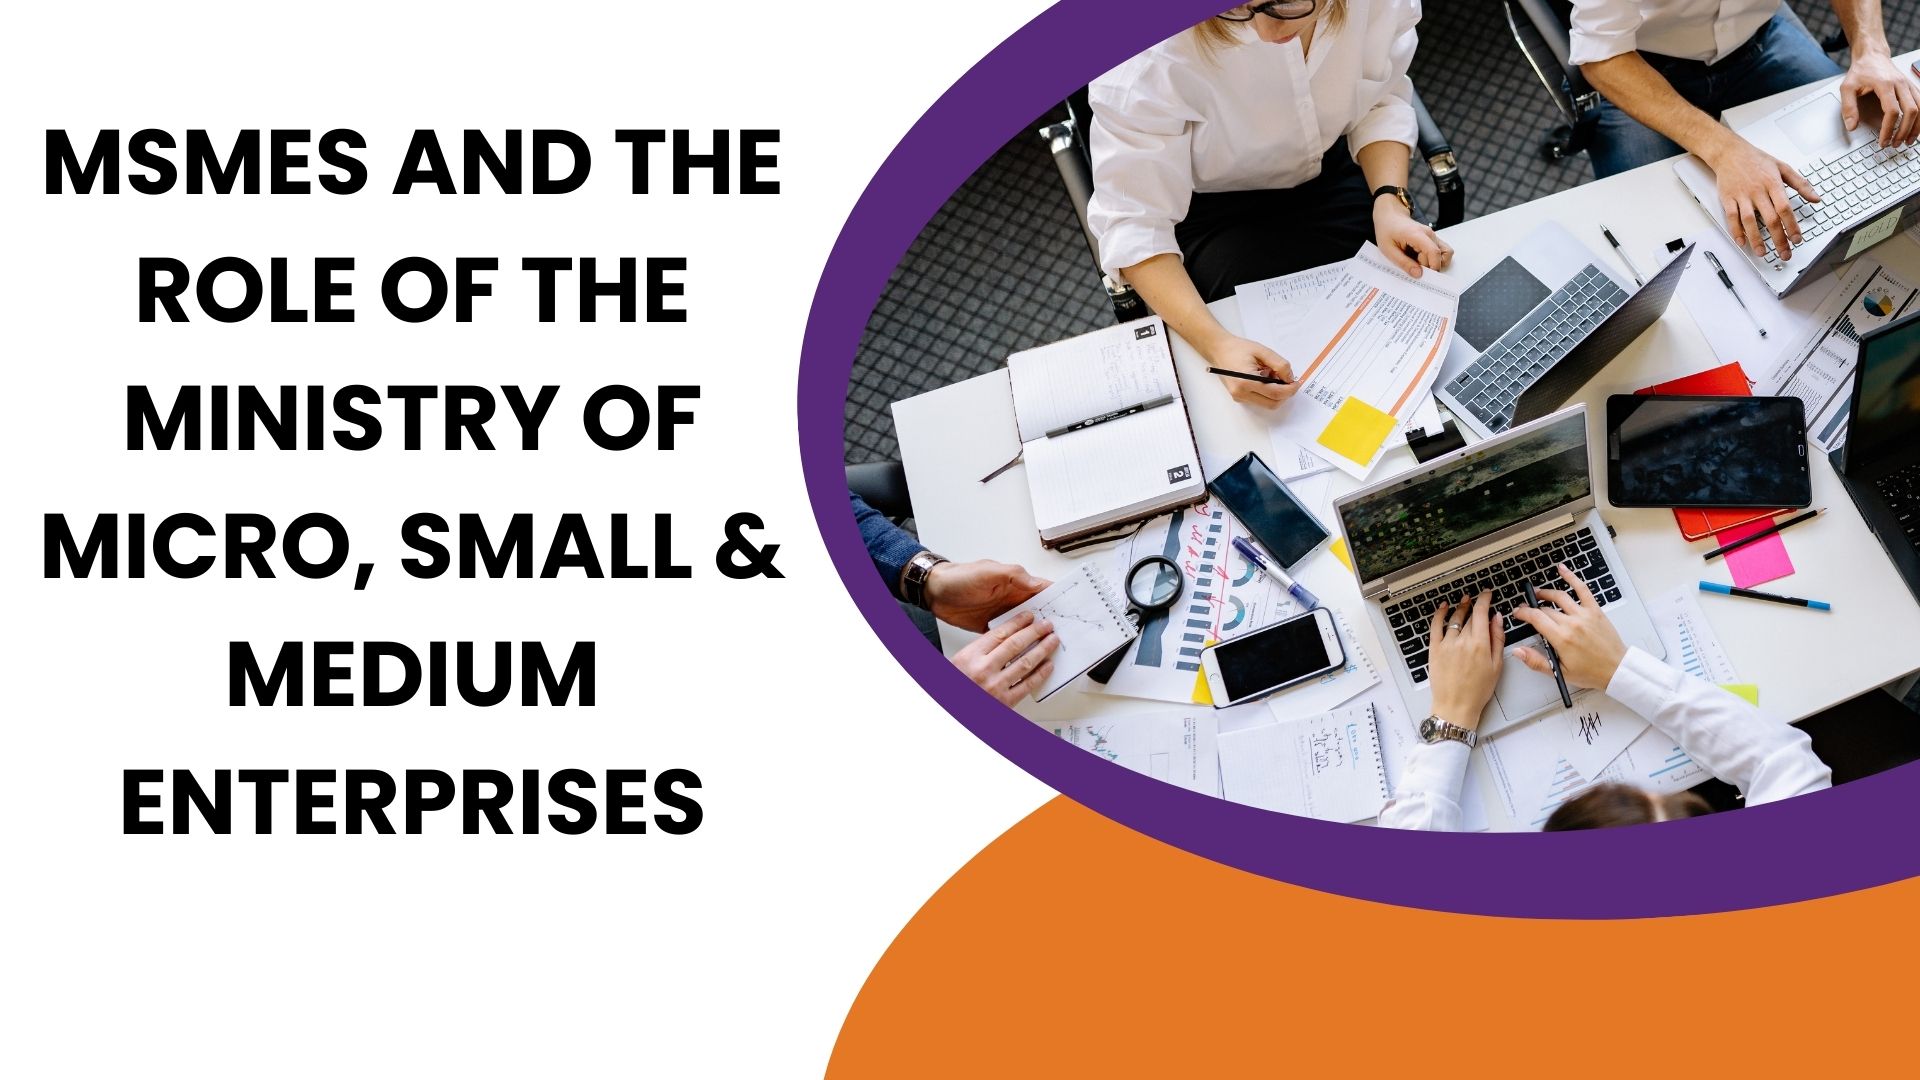 MSMEs and the Role of the Ministry of Micro, Small & Medium Enterprises